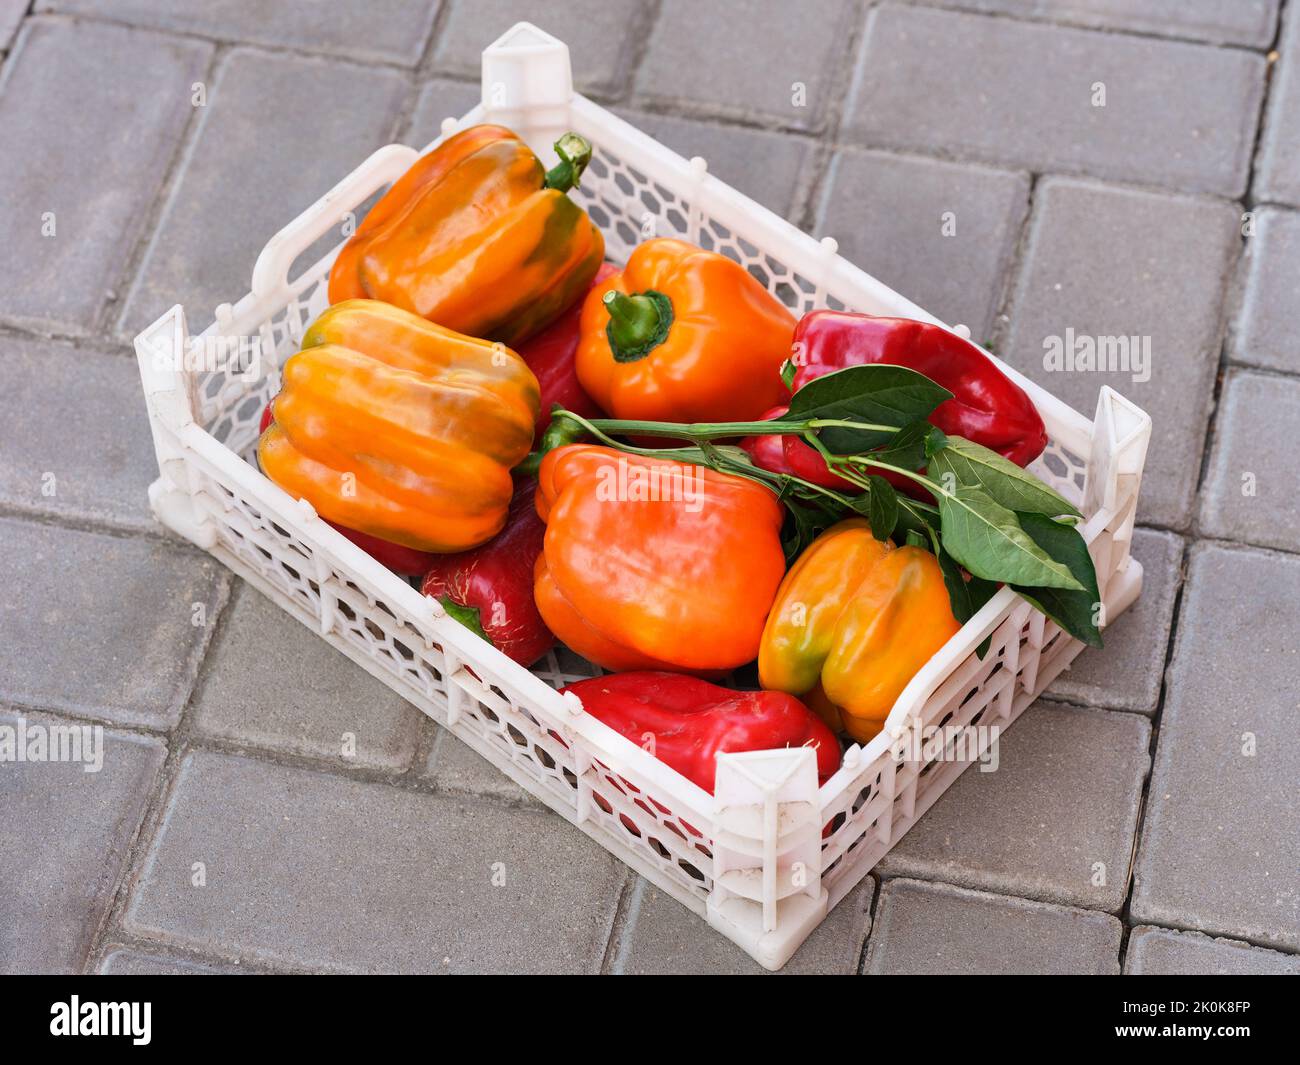 A white crate full of  fresh organic bell peppers standing outdoors Stock Photo